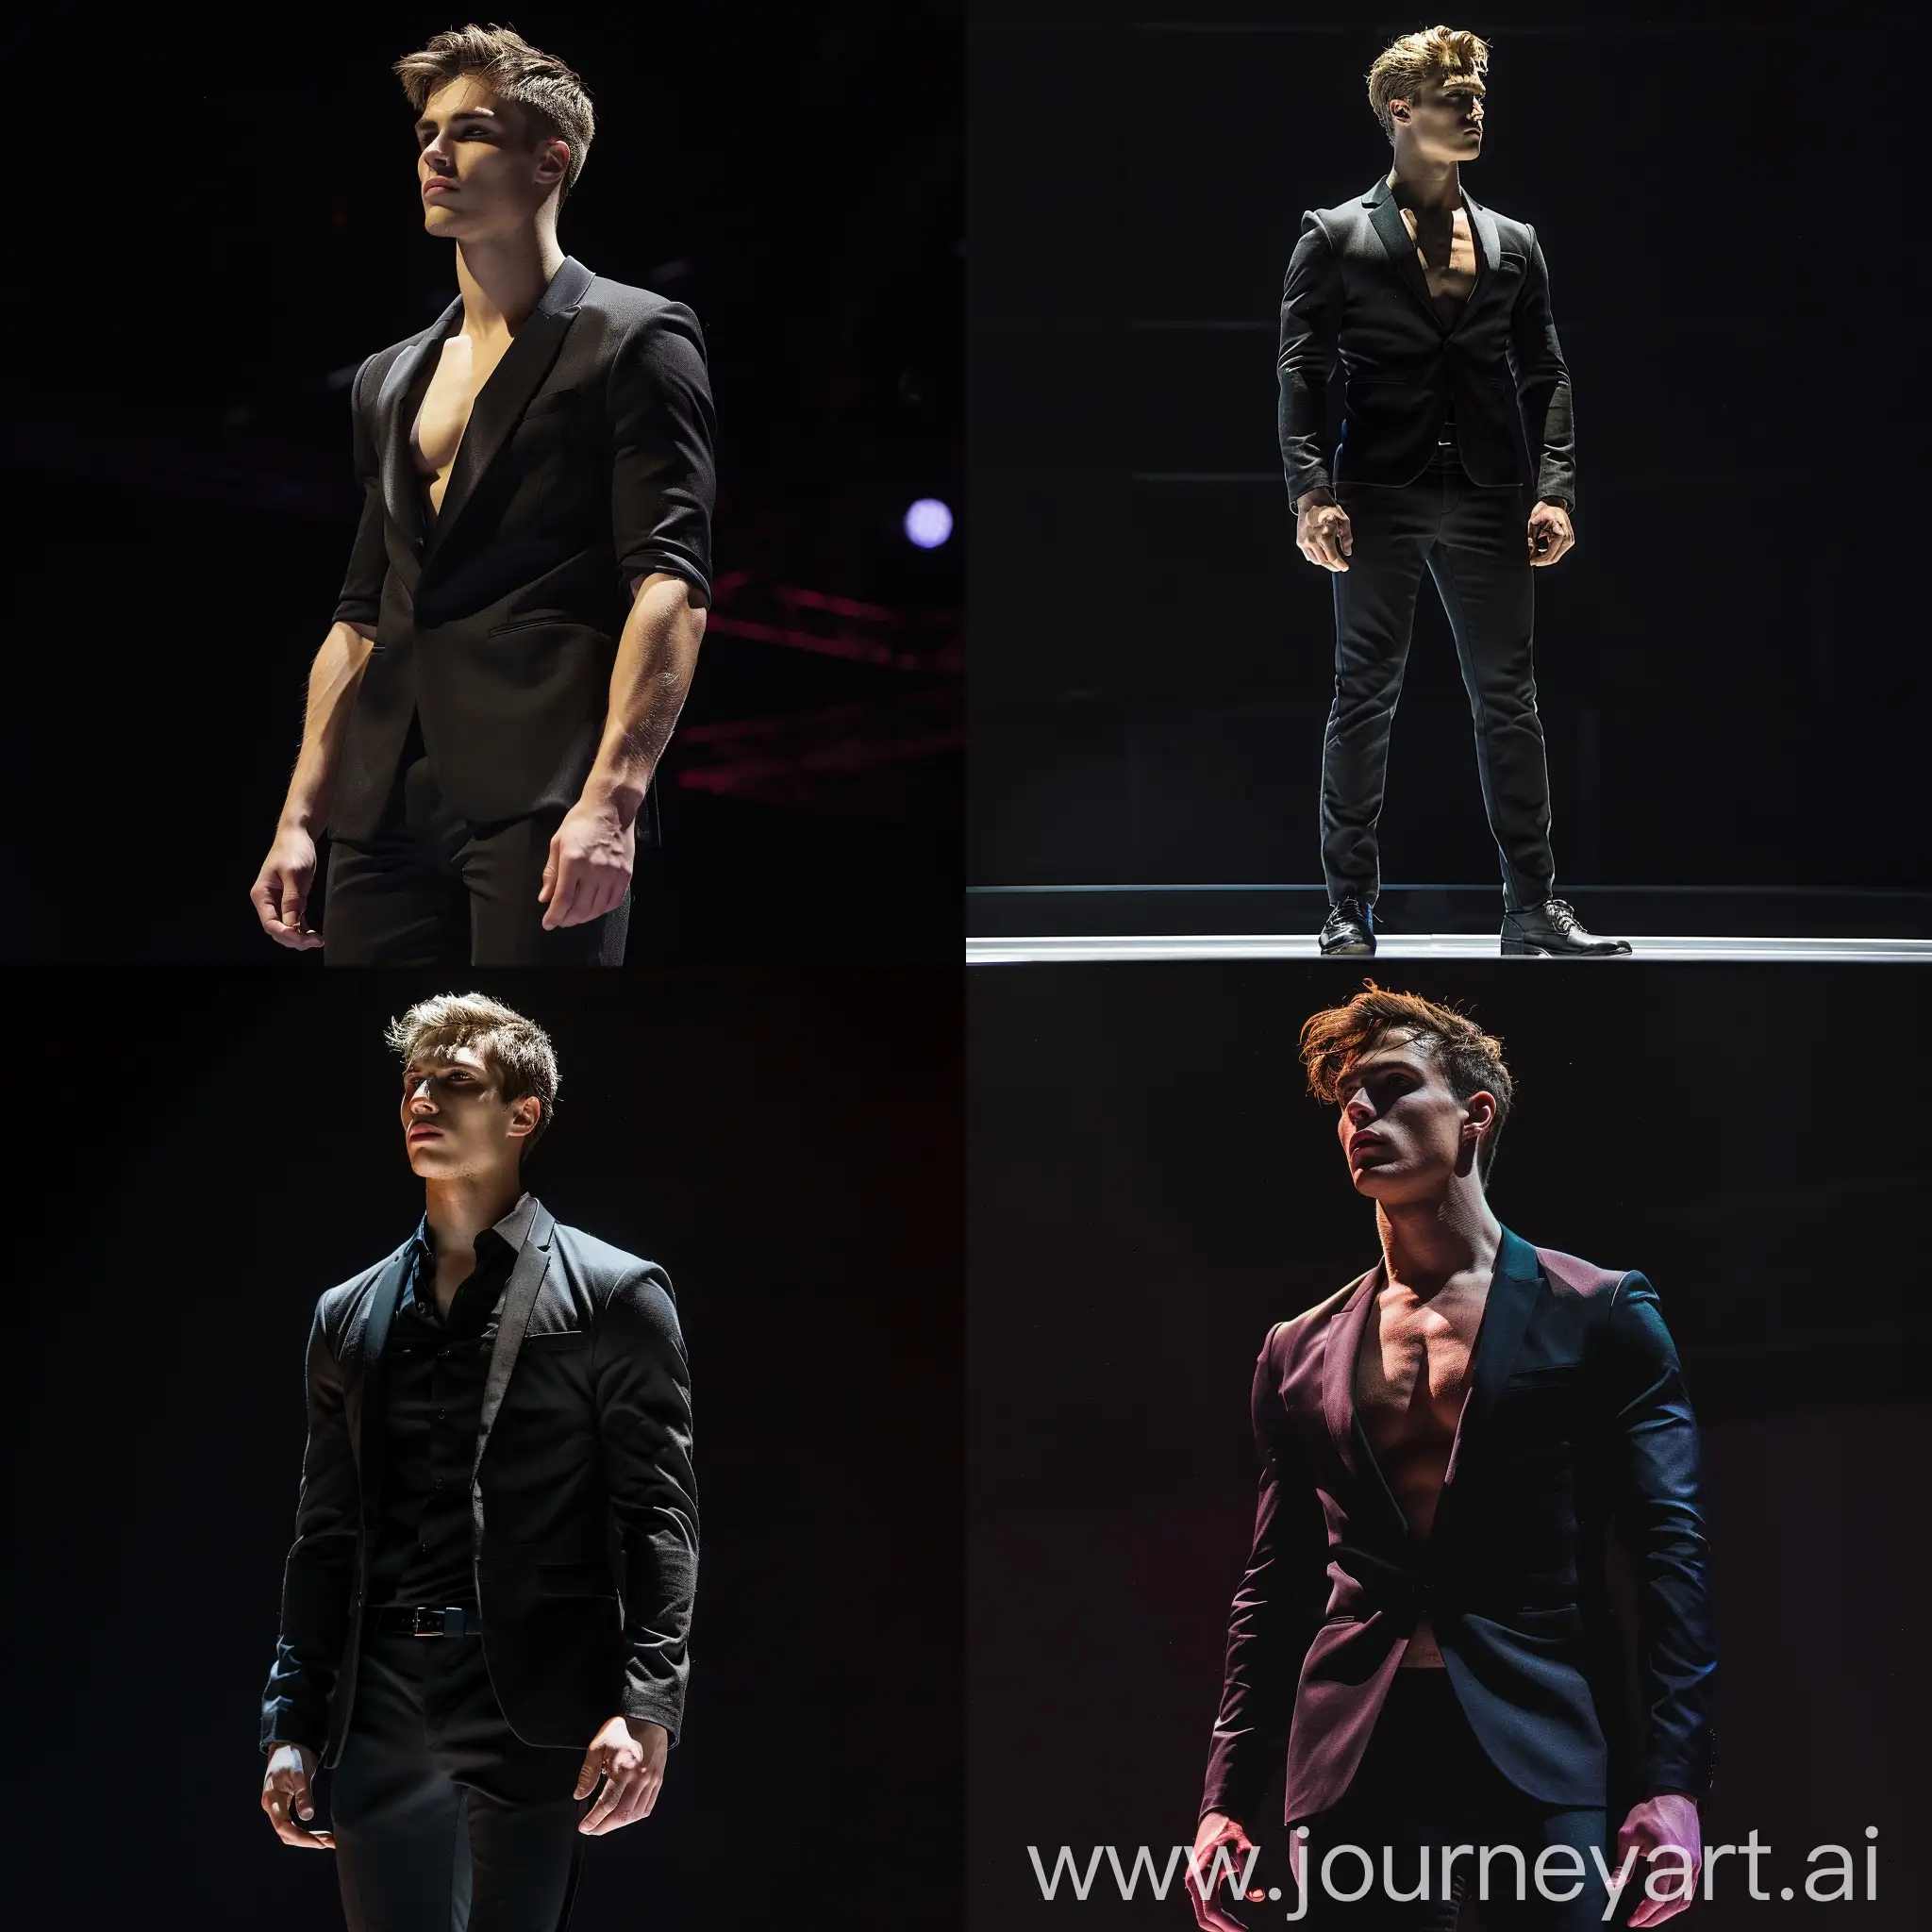 Athletic-Male-Model-in-Black-Suit-on-Stage